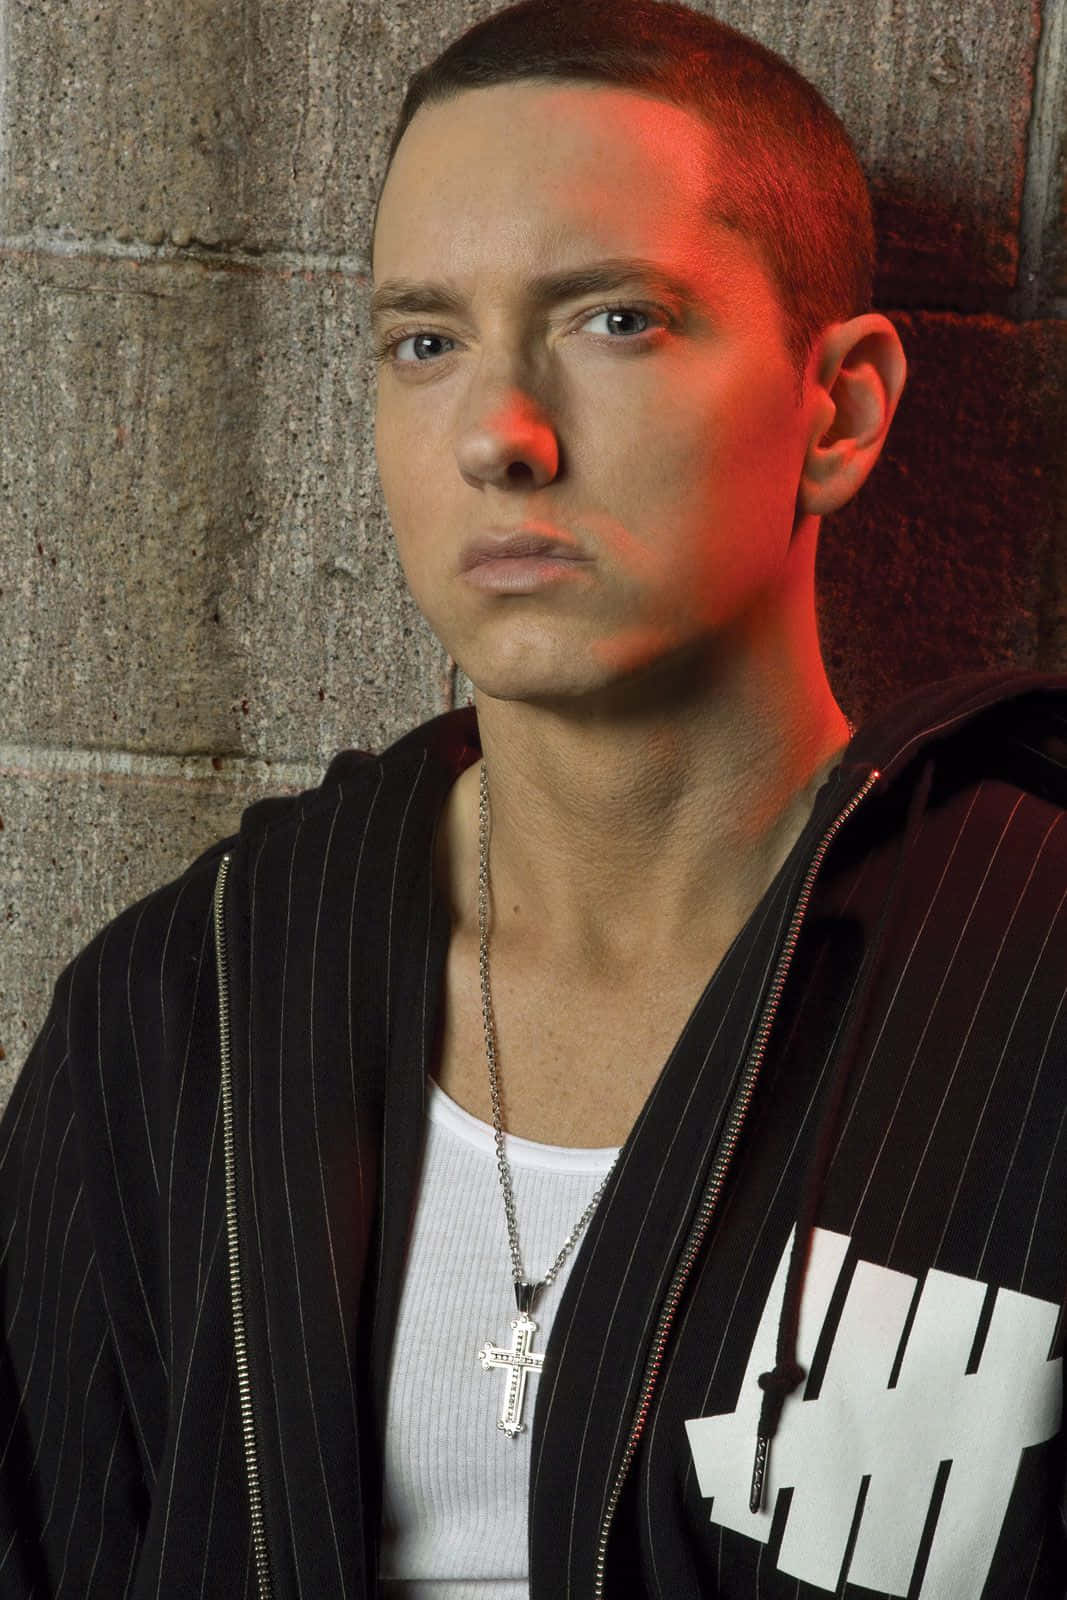 "Everything I do, I do it to make it to the top." - Eminem